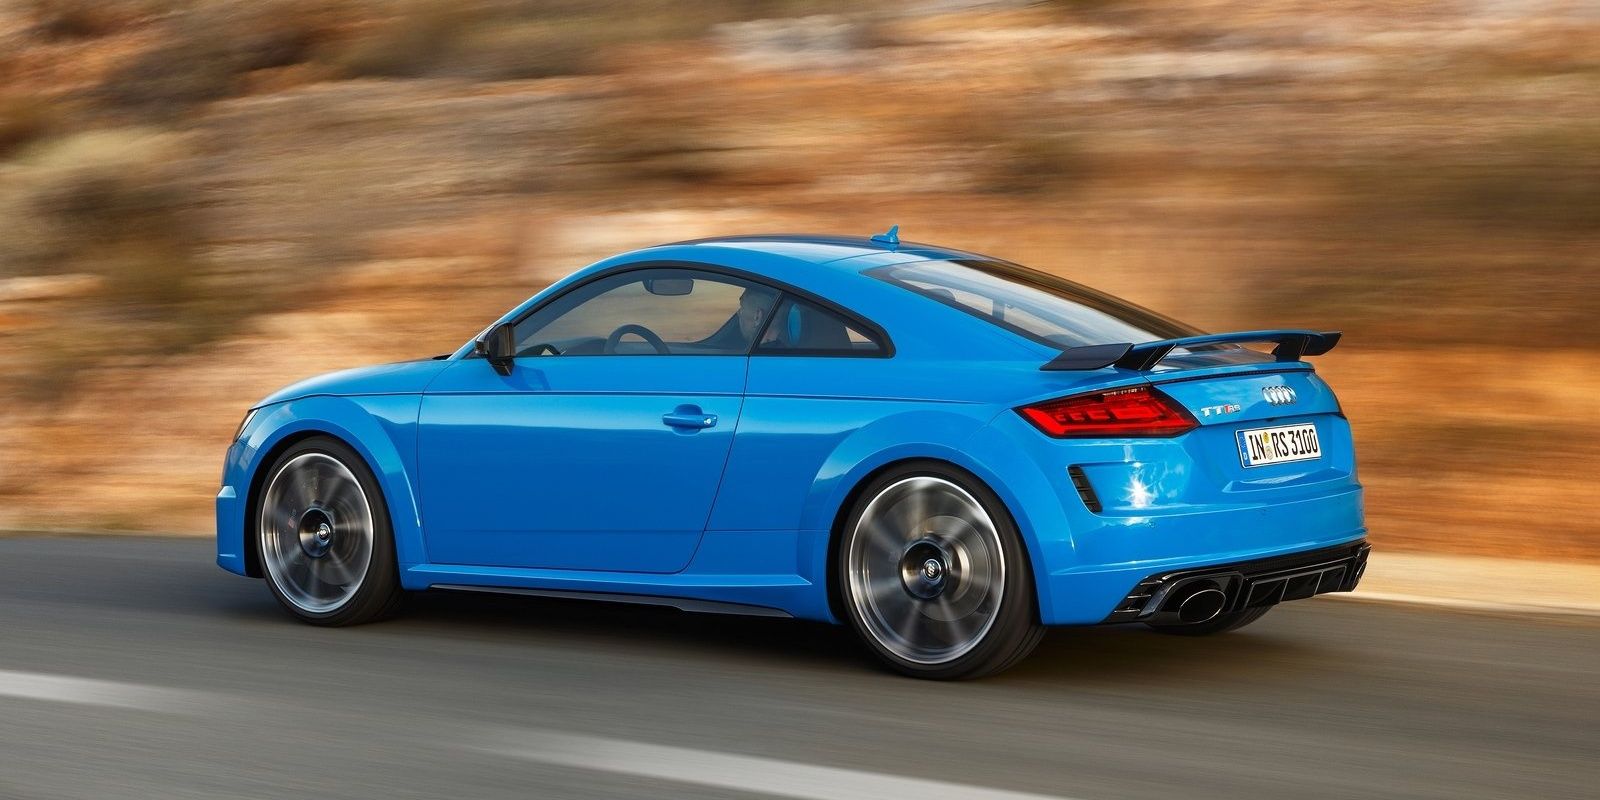 The Audi TT RS is fast on the highway